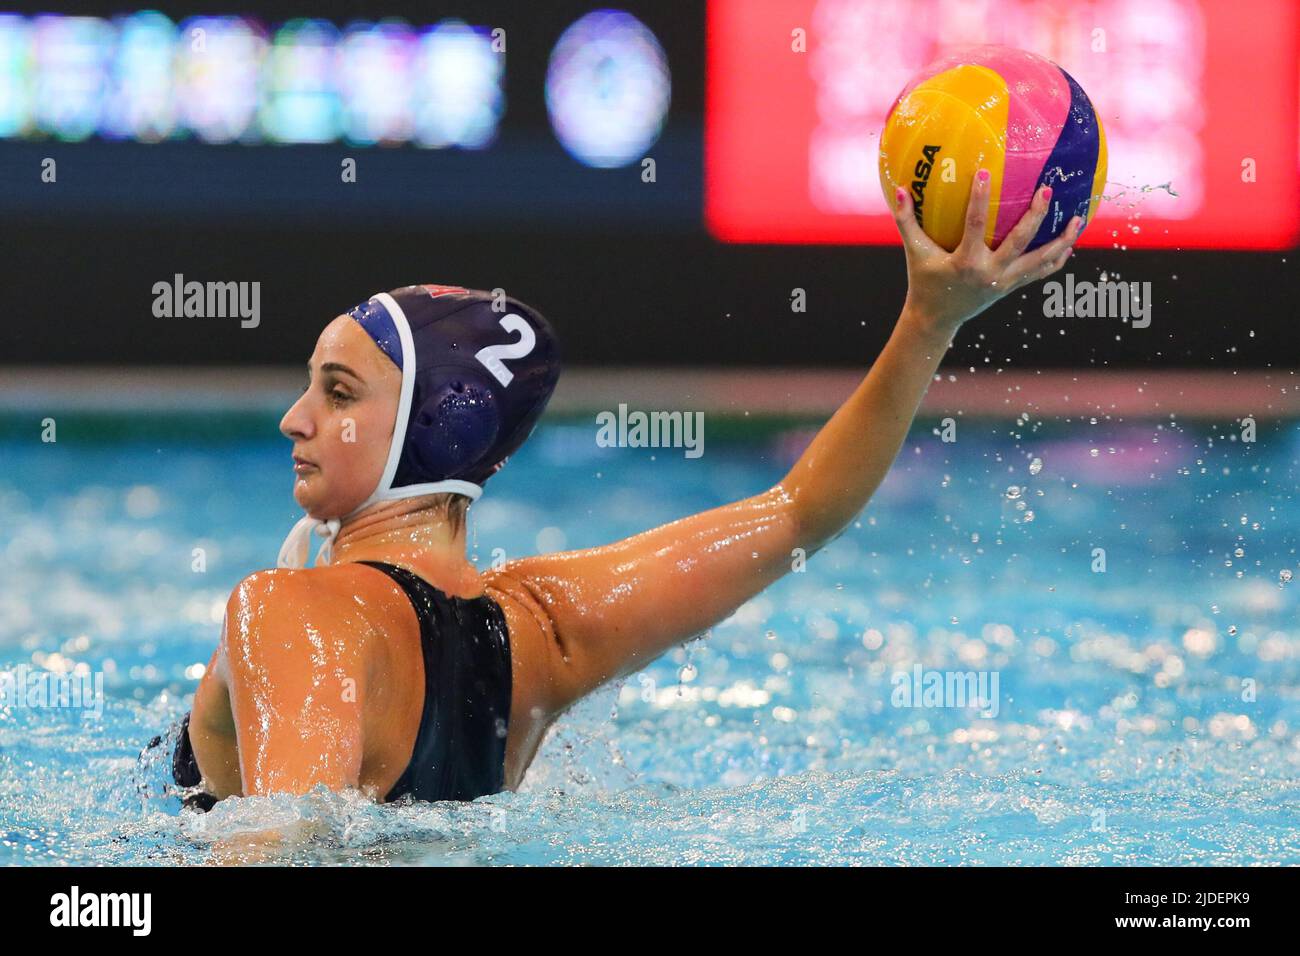 DEBRECEN, HUNGARY - JUNE 20: Maddie Musselman of United States during the  FINA World Championships Budapest 2022 match between South Africa and  United States of America on June 20, 2022 in Debrecen,